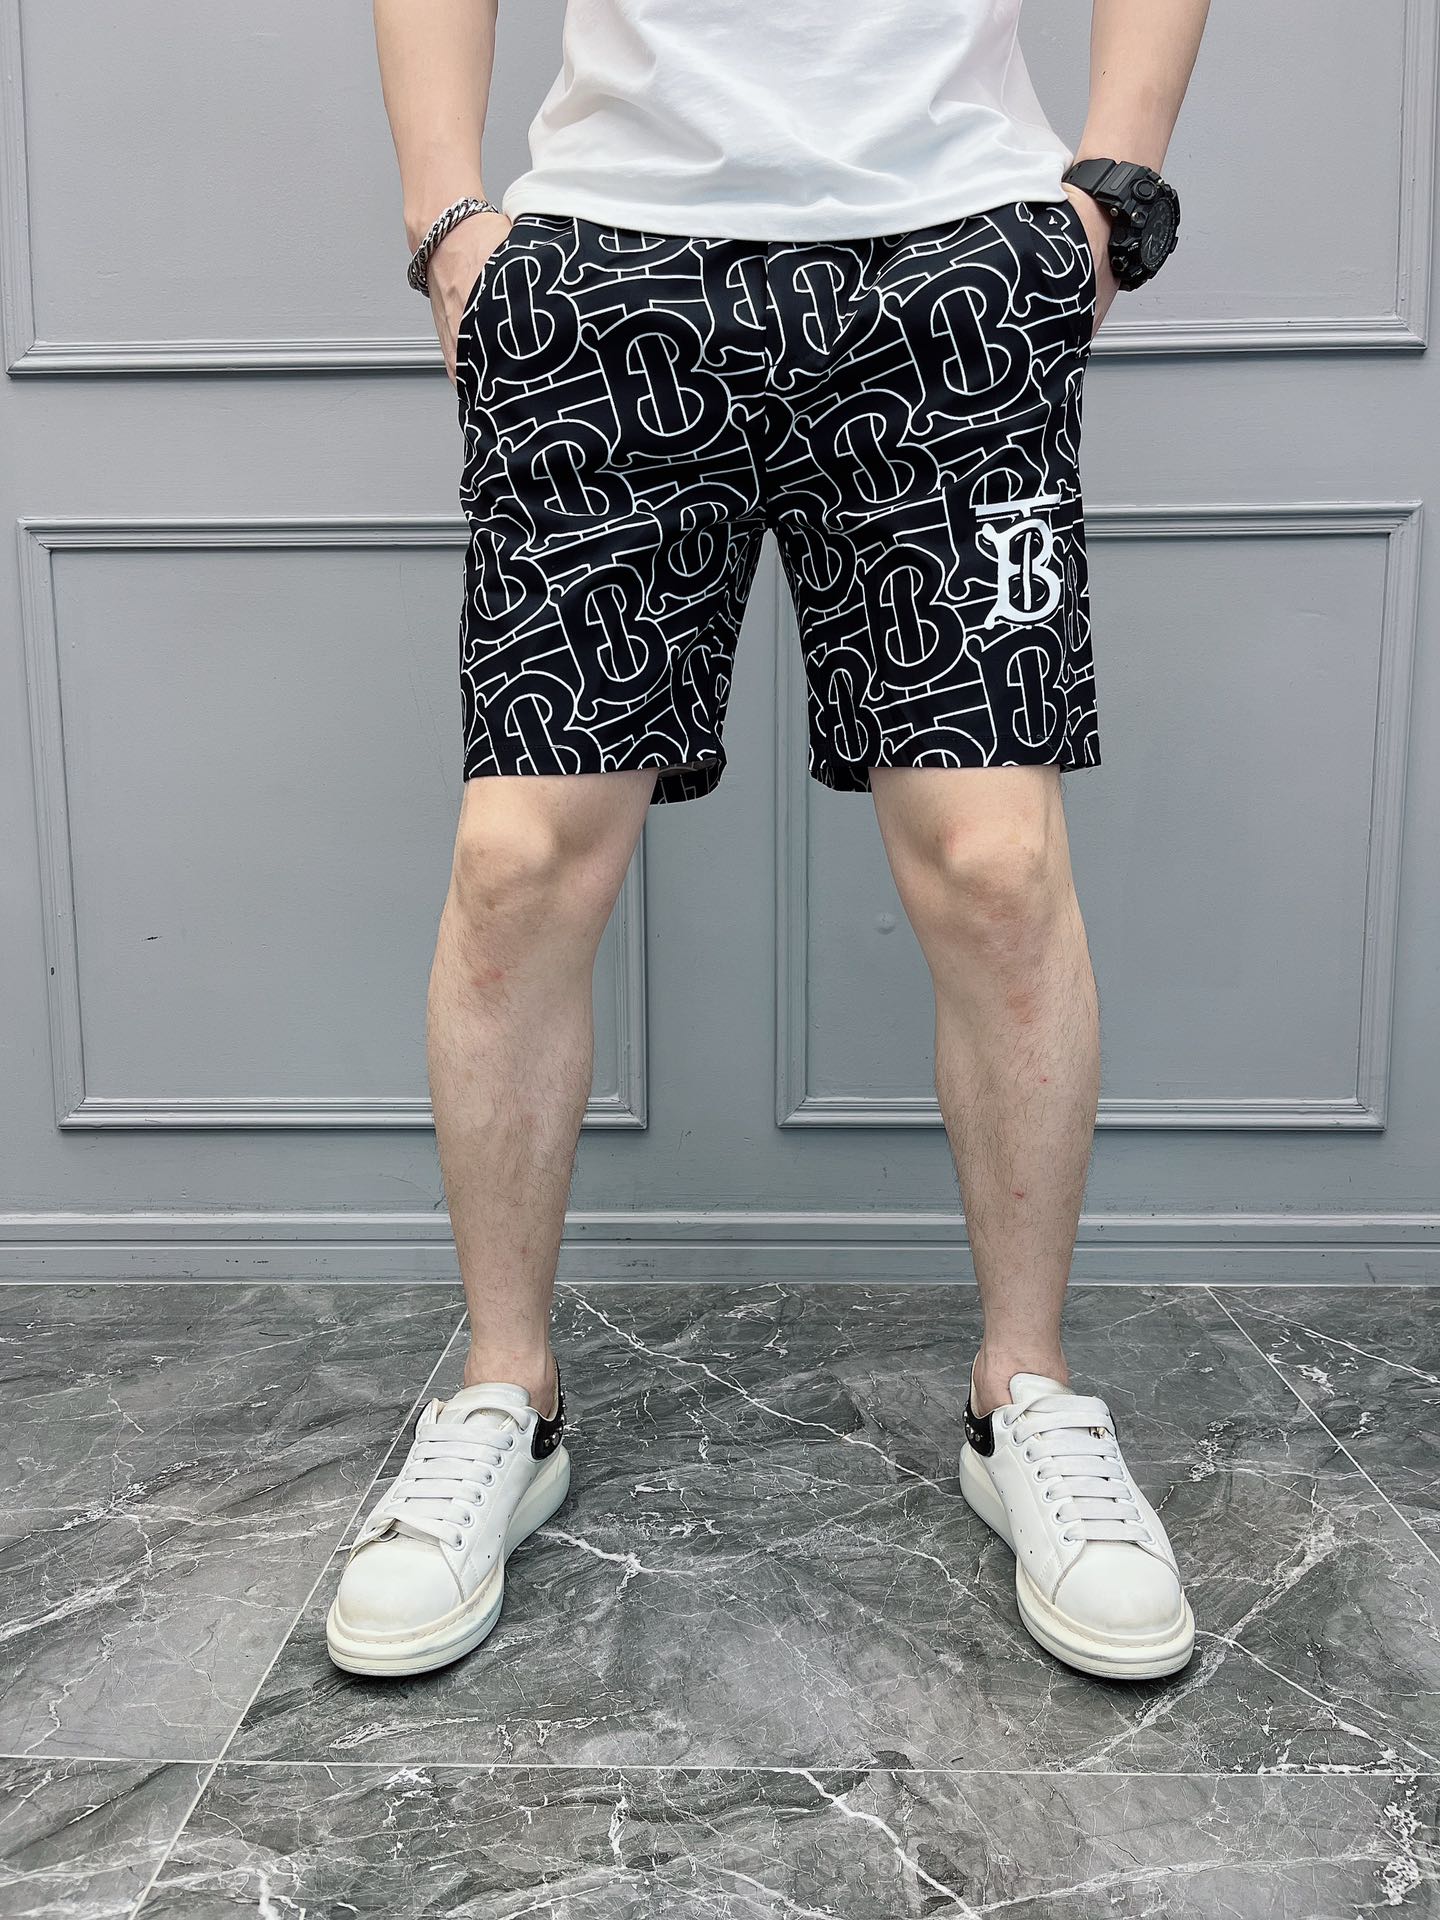 Burberry Clothing Shorts Printing Men Summer Collection Fashion Beach